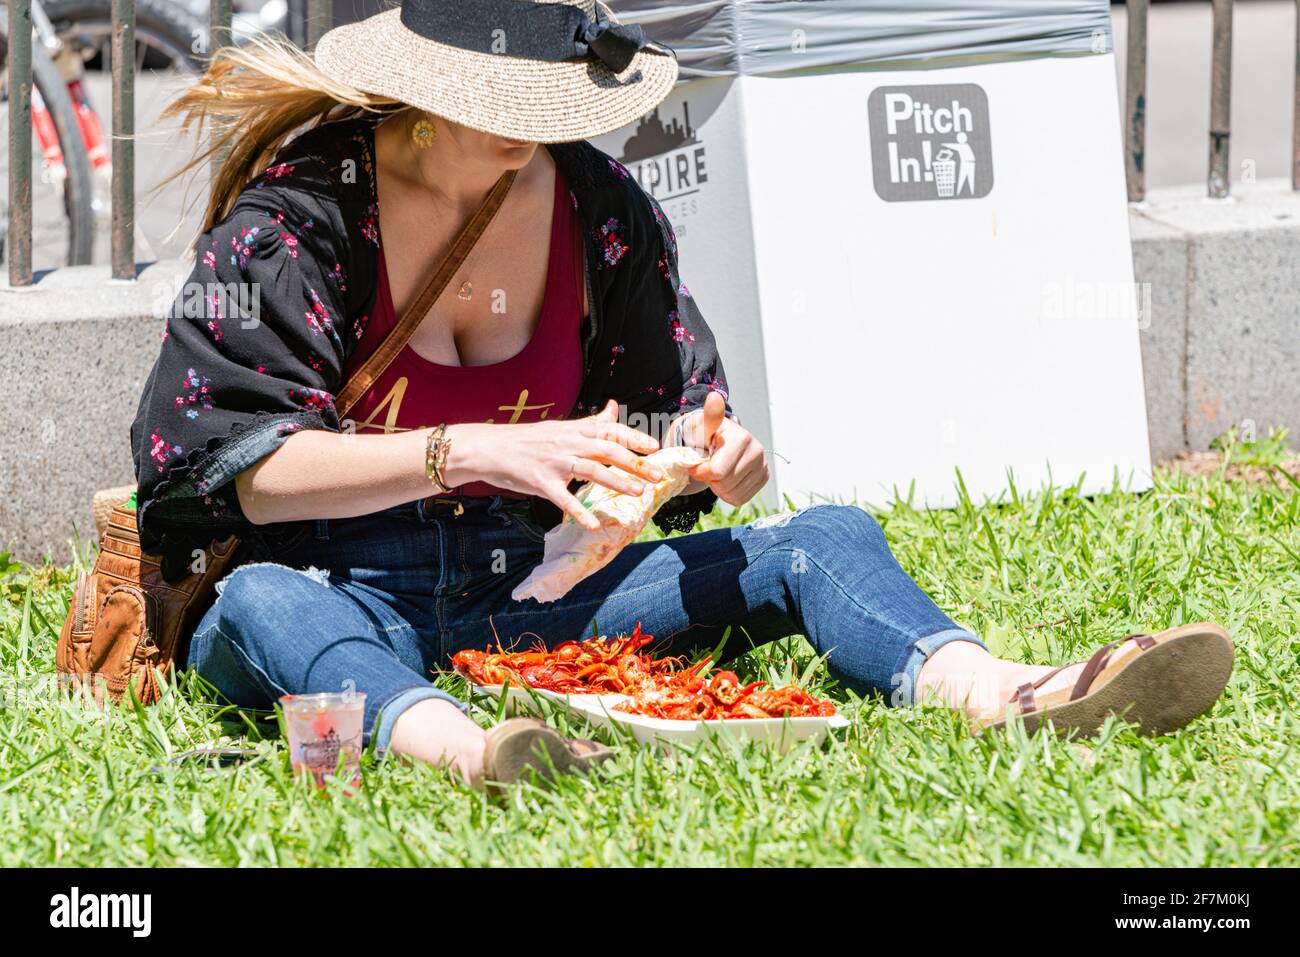 NEW ORLEANS, LA, USA - APRIL 14, 2019: Woman Eating Crawfish at French Quarter Festival (Free) in New Orleans Stock Photo